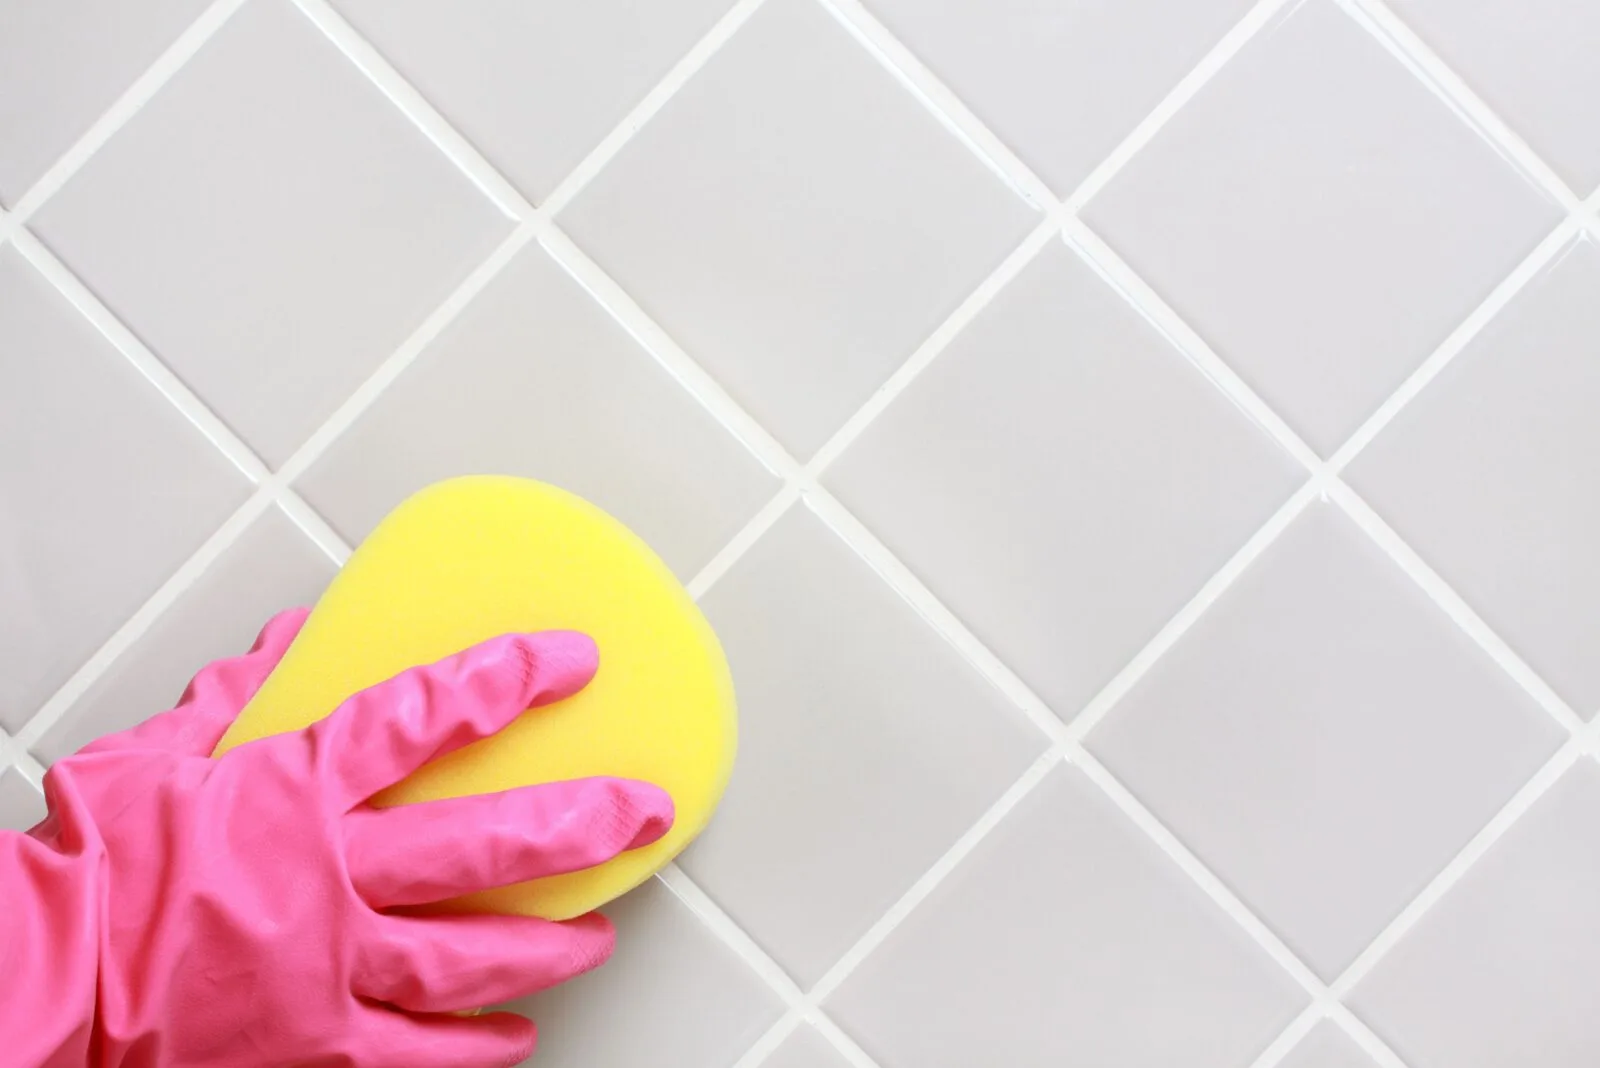 7 Best Grout Cleaners to Get Your Bathroom Sparkling